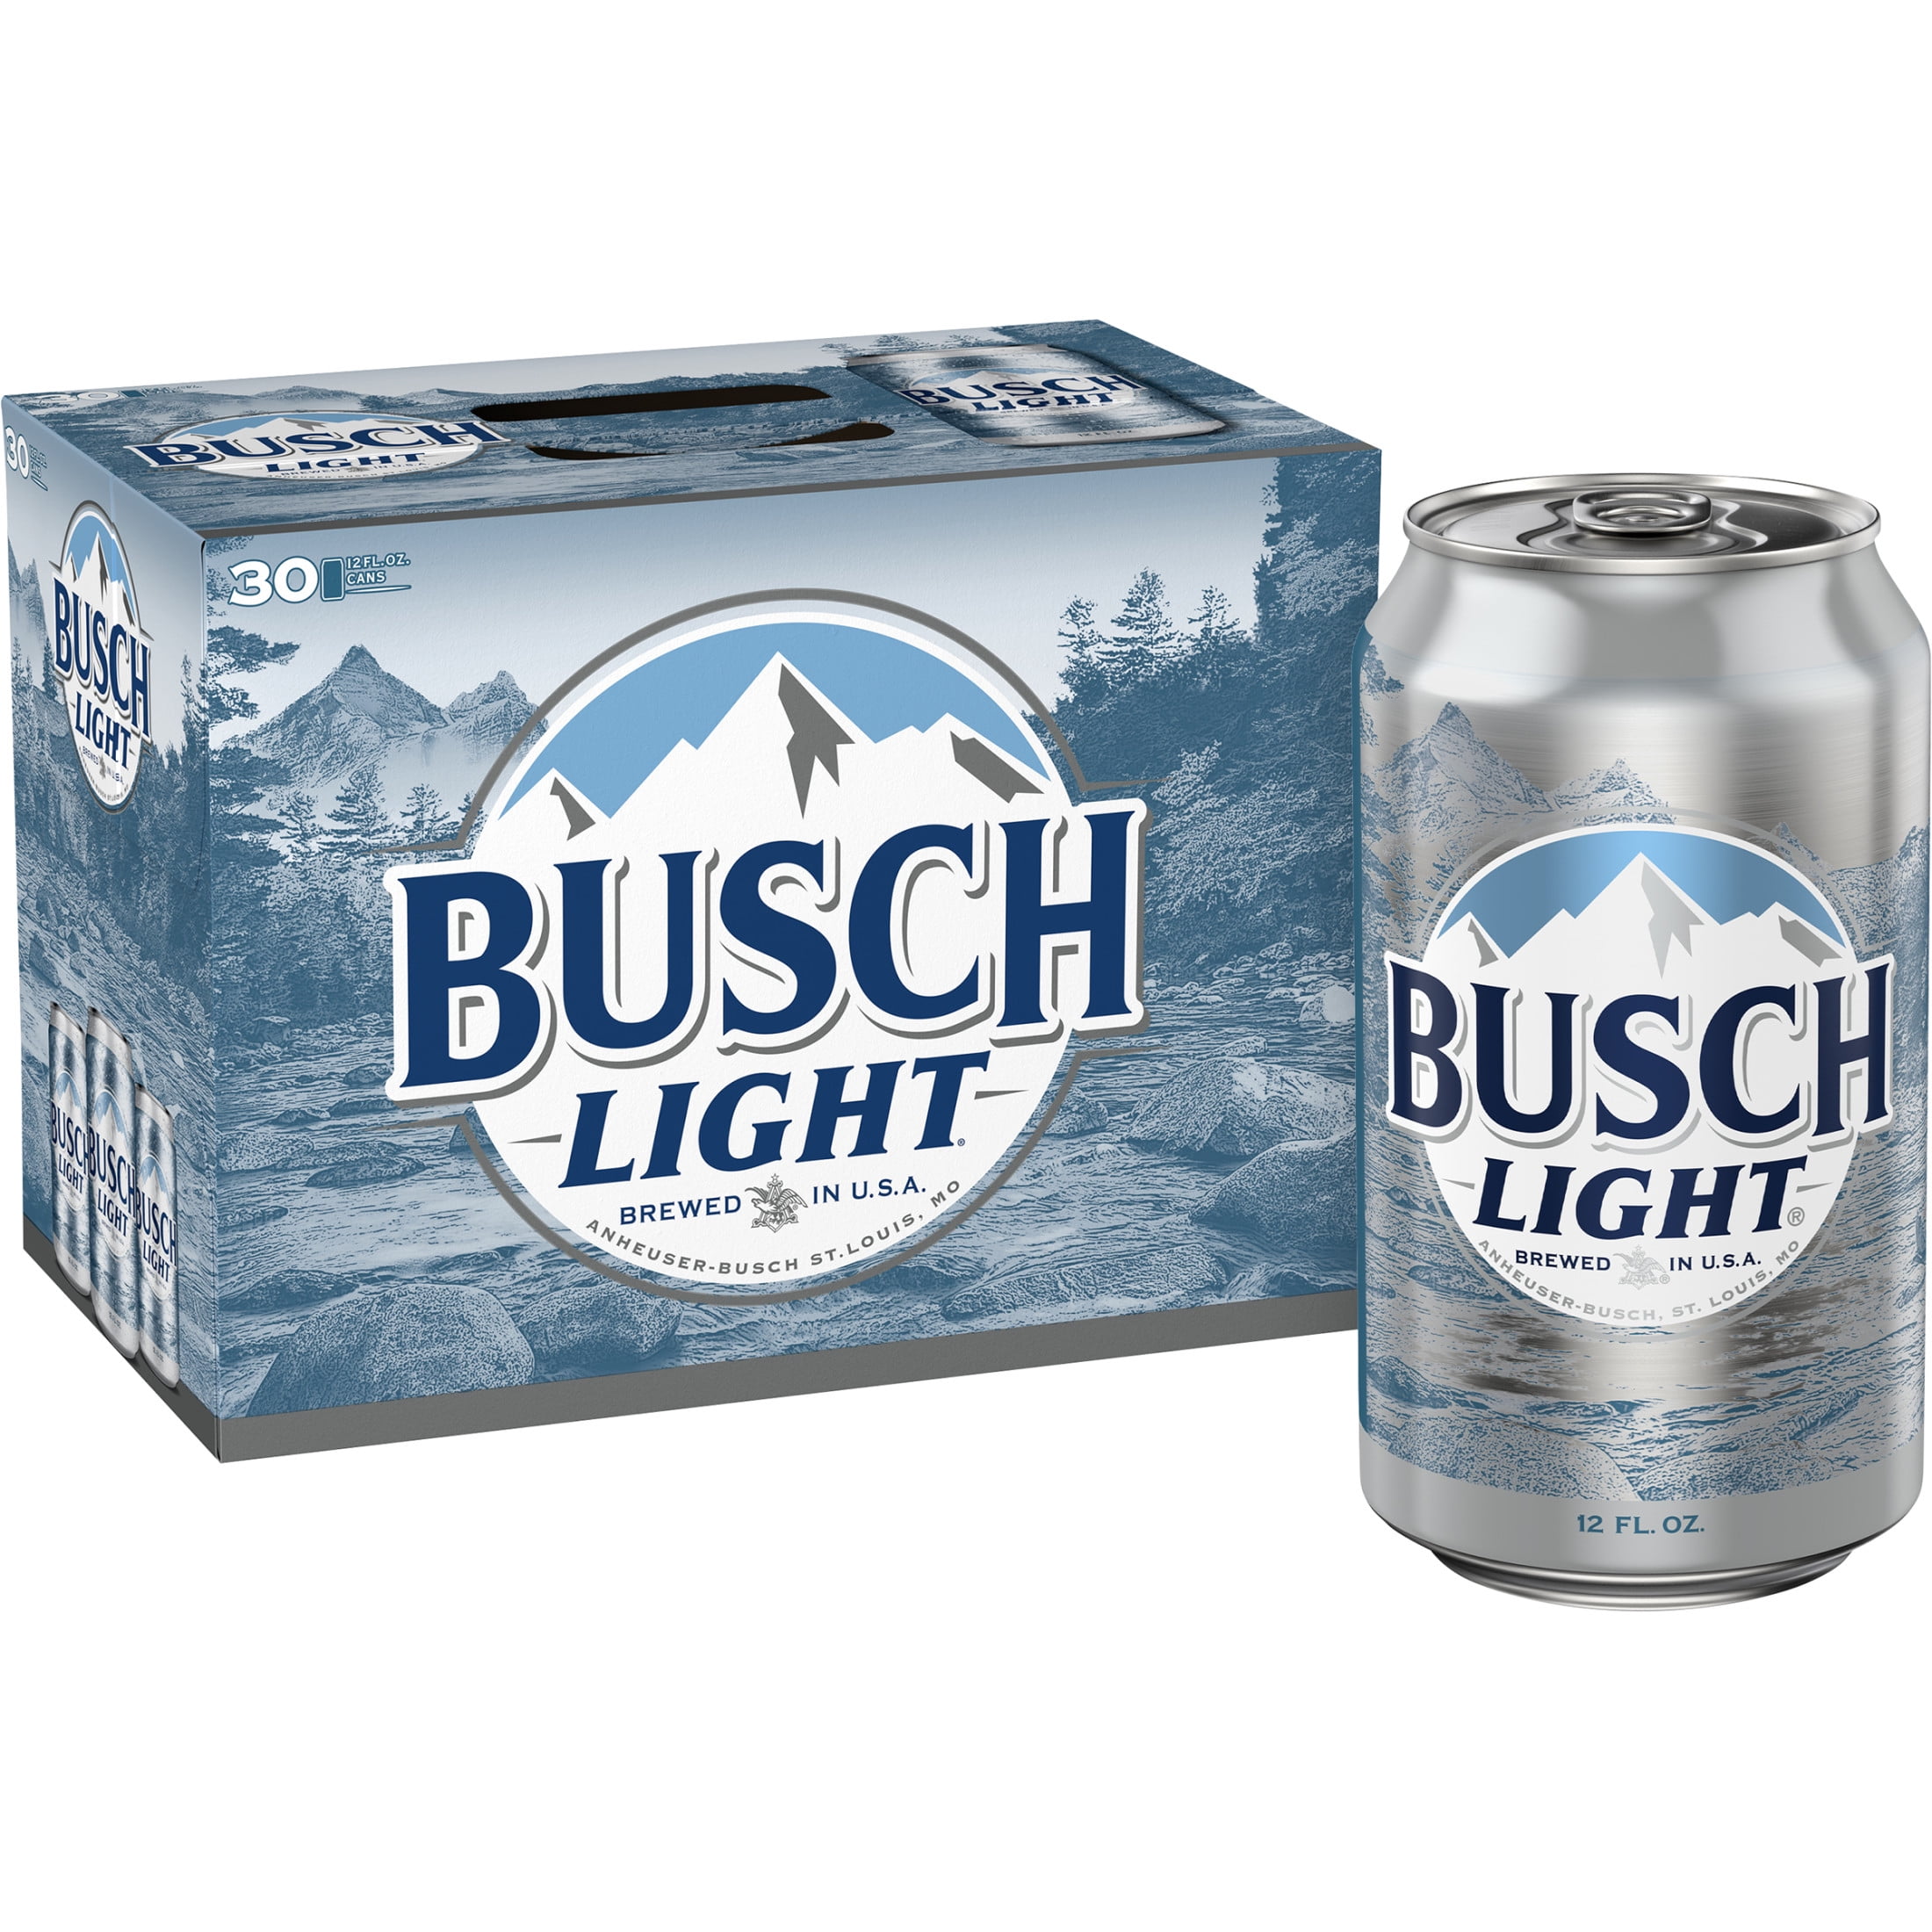 Who Has Busch Light On Sale